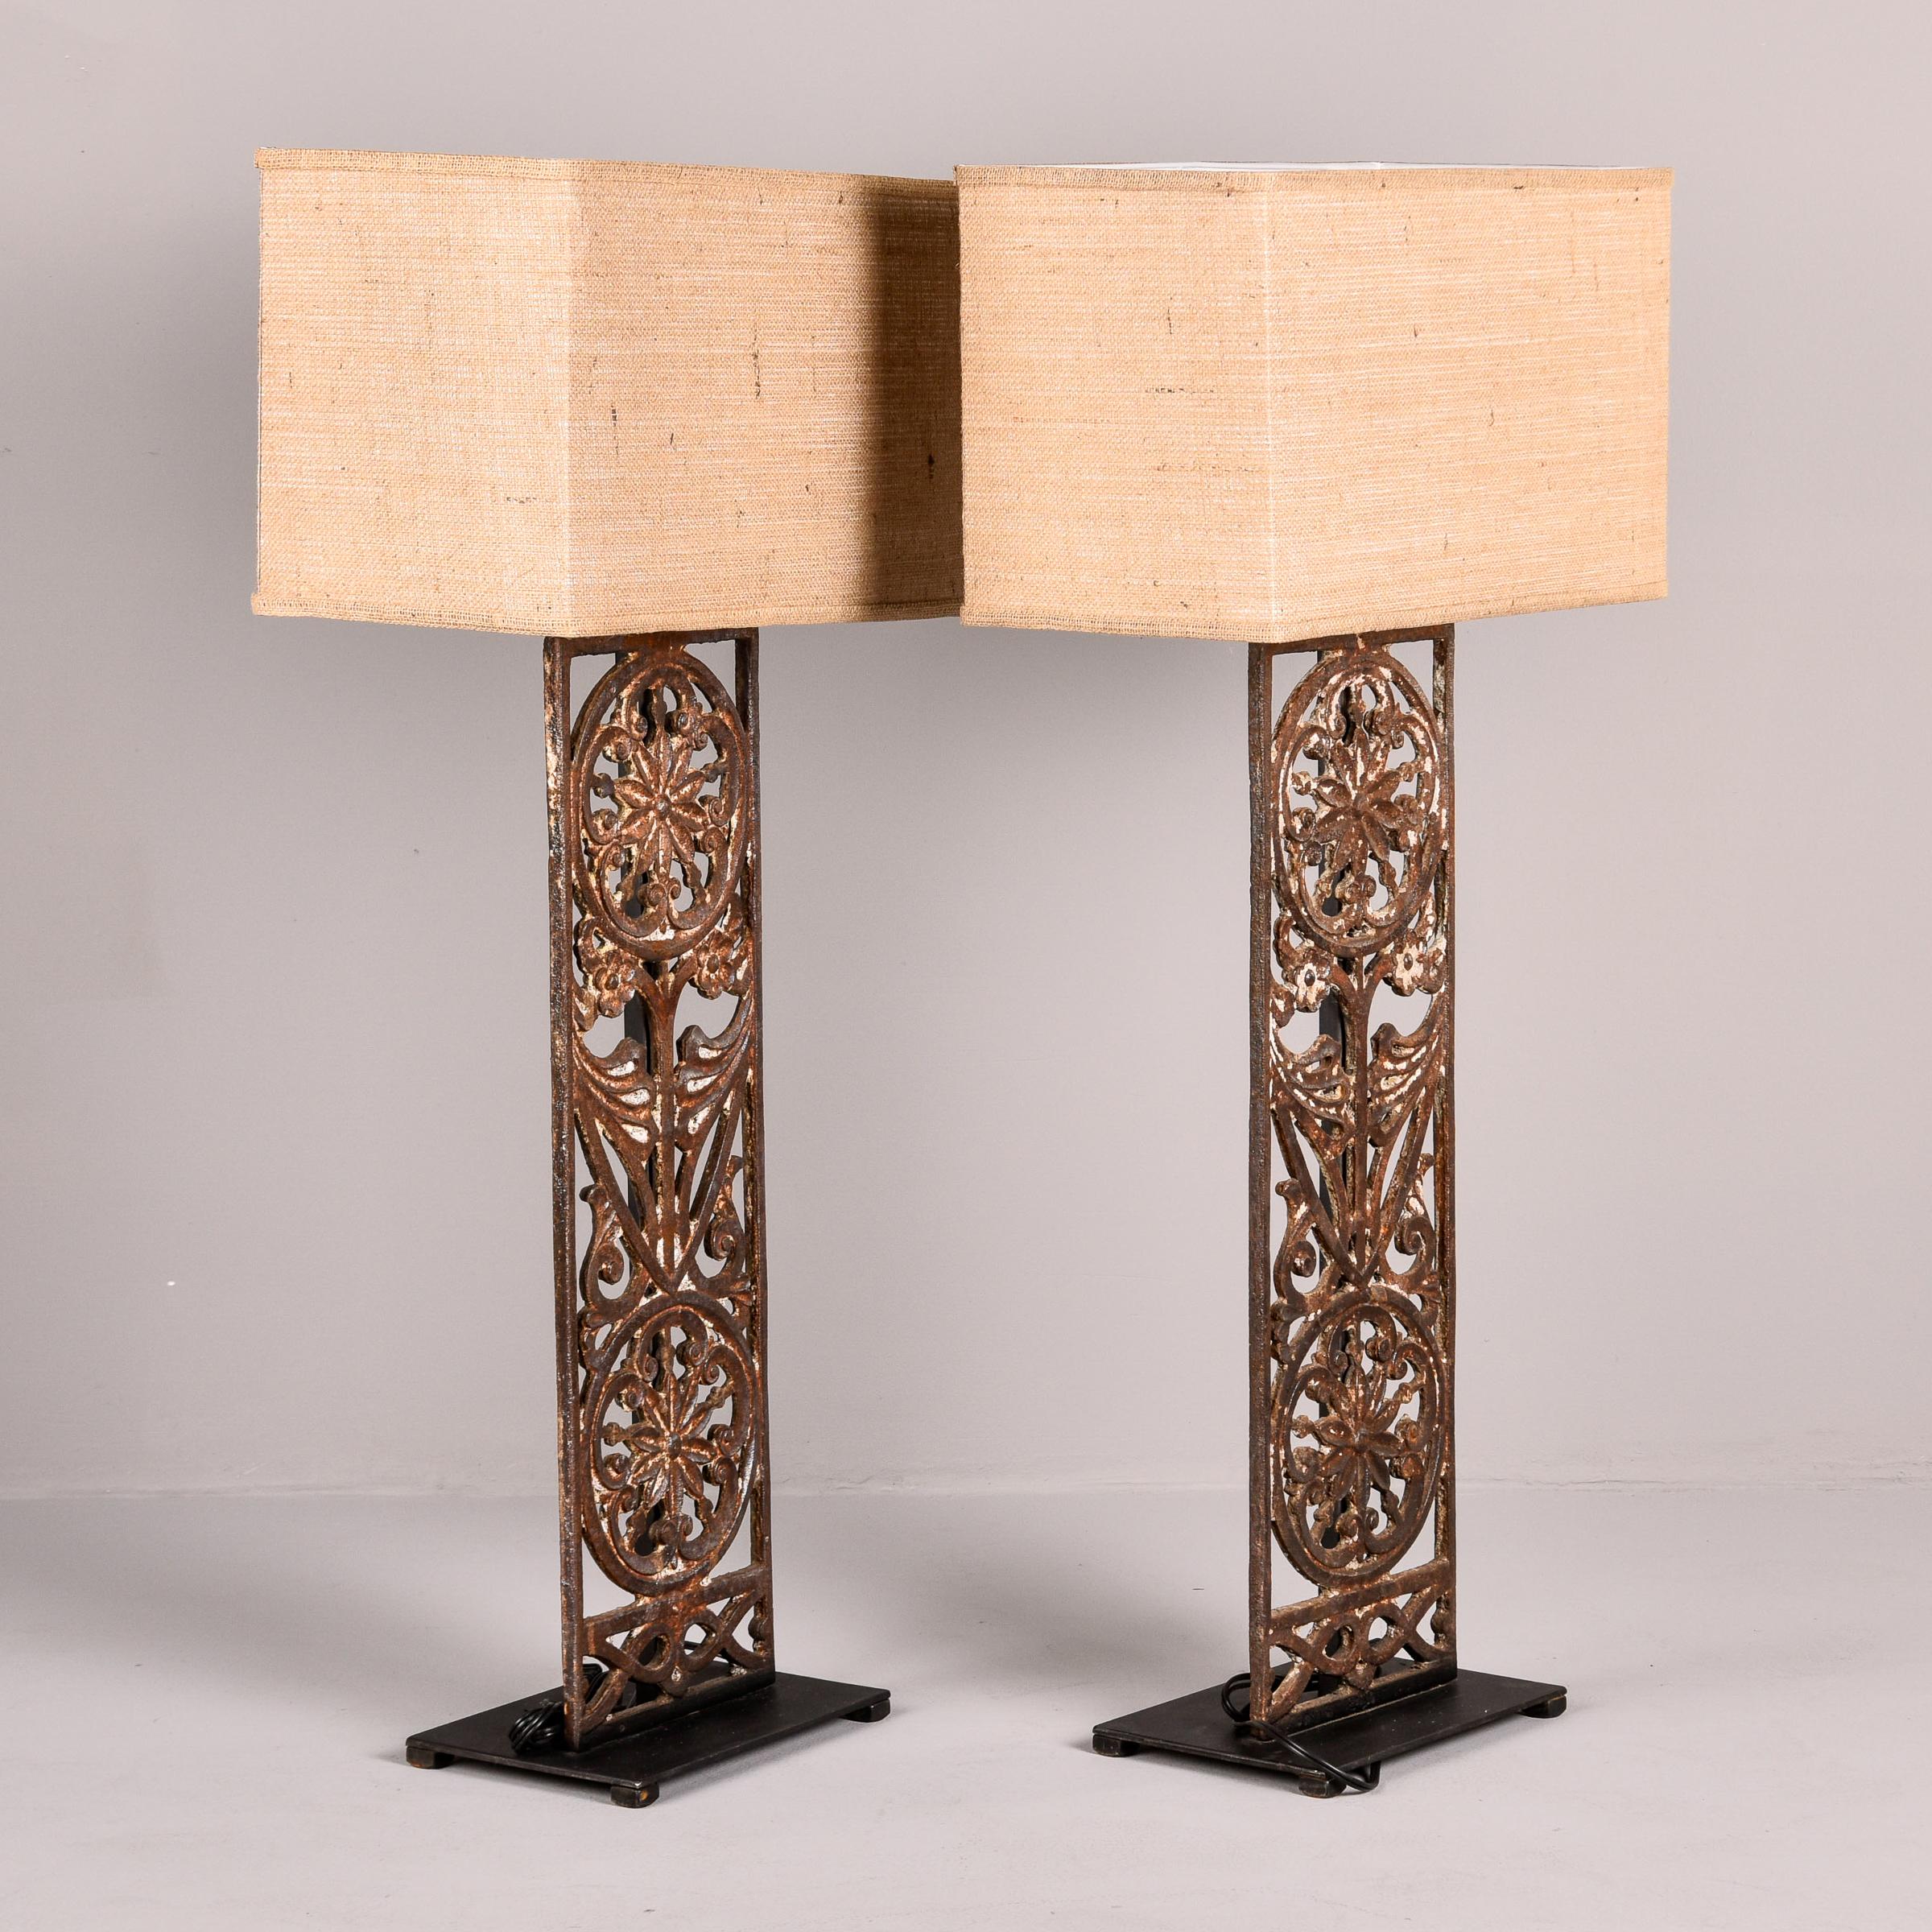 This pair of tall table lamps were custom made from 19th century Belgian decorative iron gate fragments. The tall, antique gate fragments are welded to new, black iron footed bases.  Each lamp has a brass harp and custom-made rectangular burlap